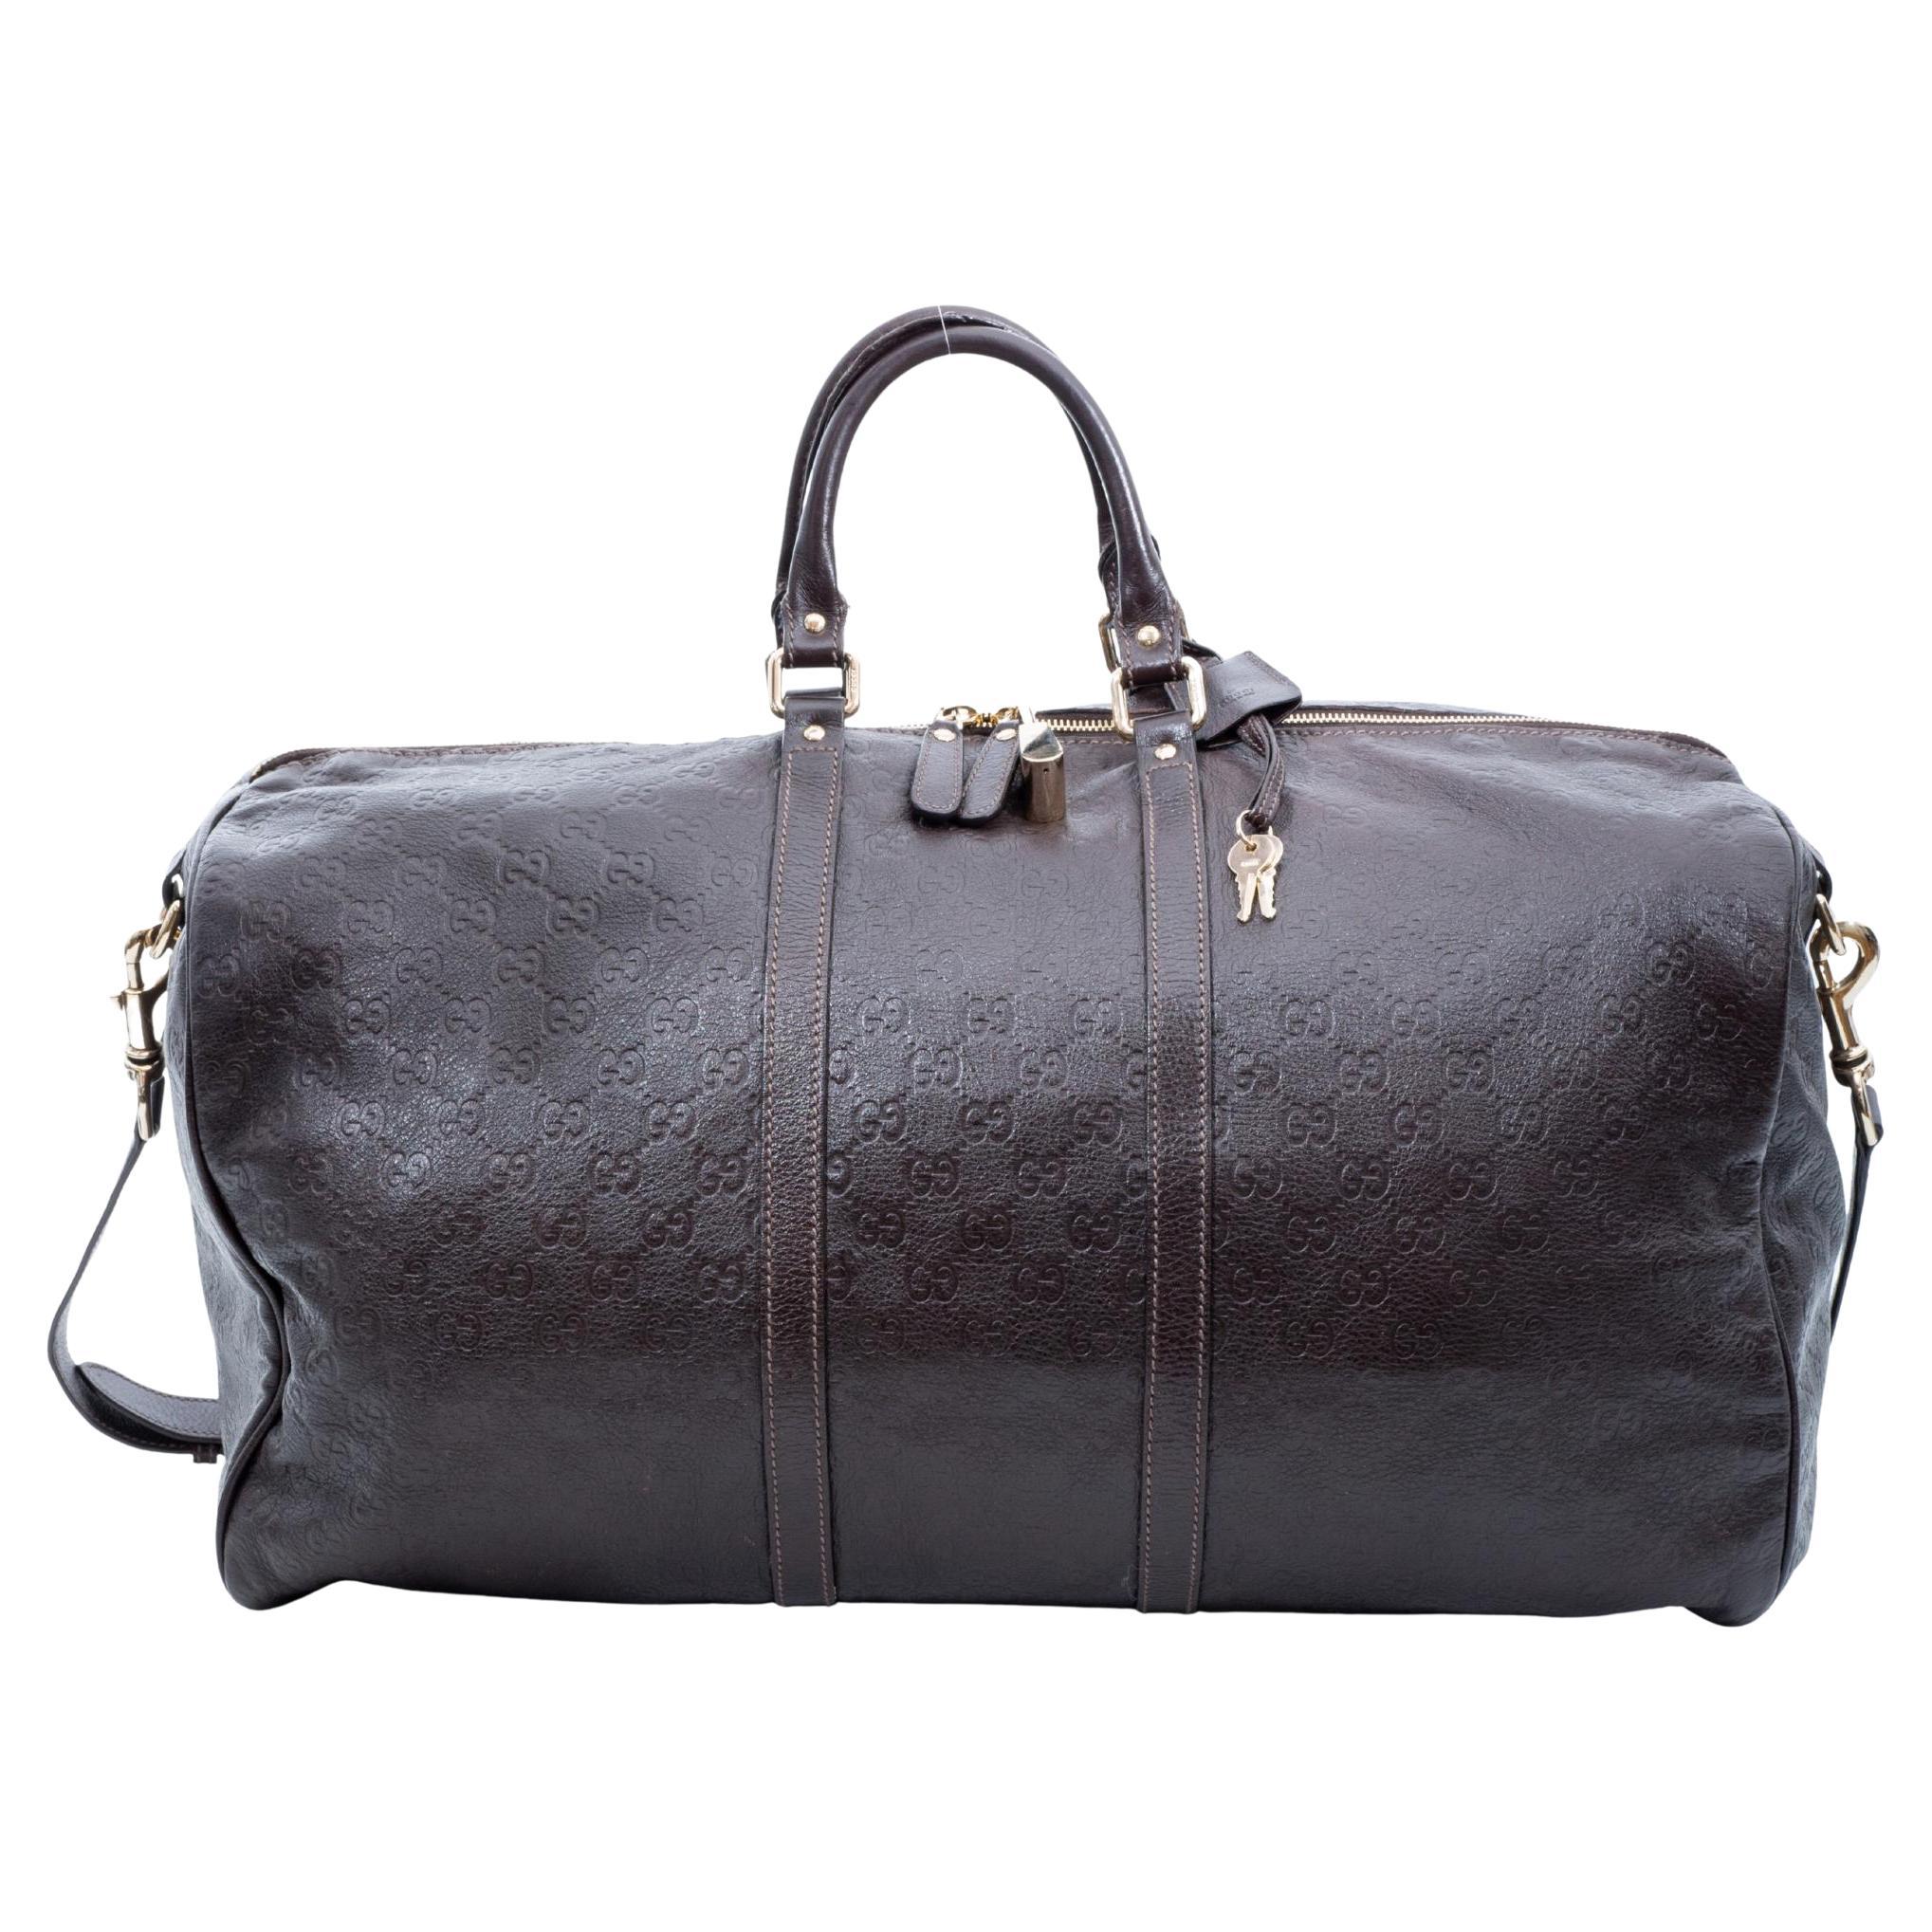 Gucci Dark Brown Guccissima Leather Carry-On Travel Duffle Bag (206500)